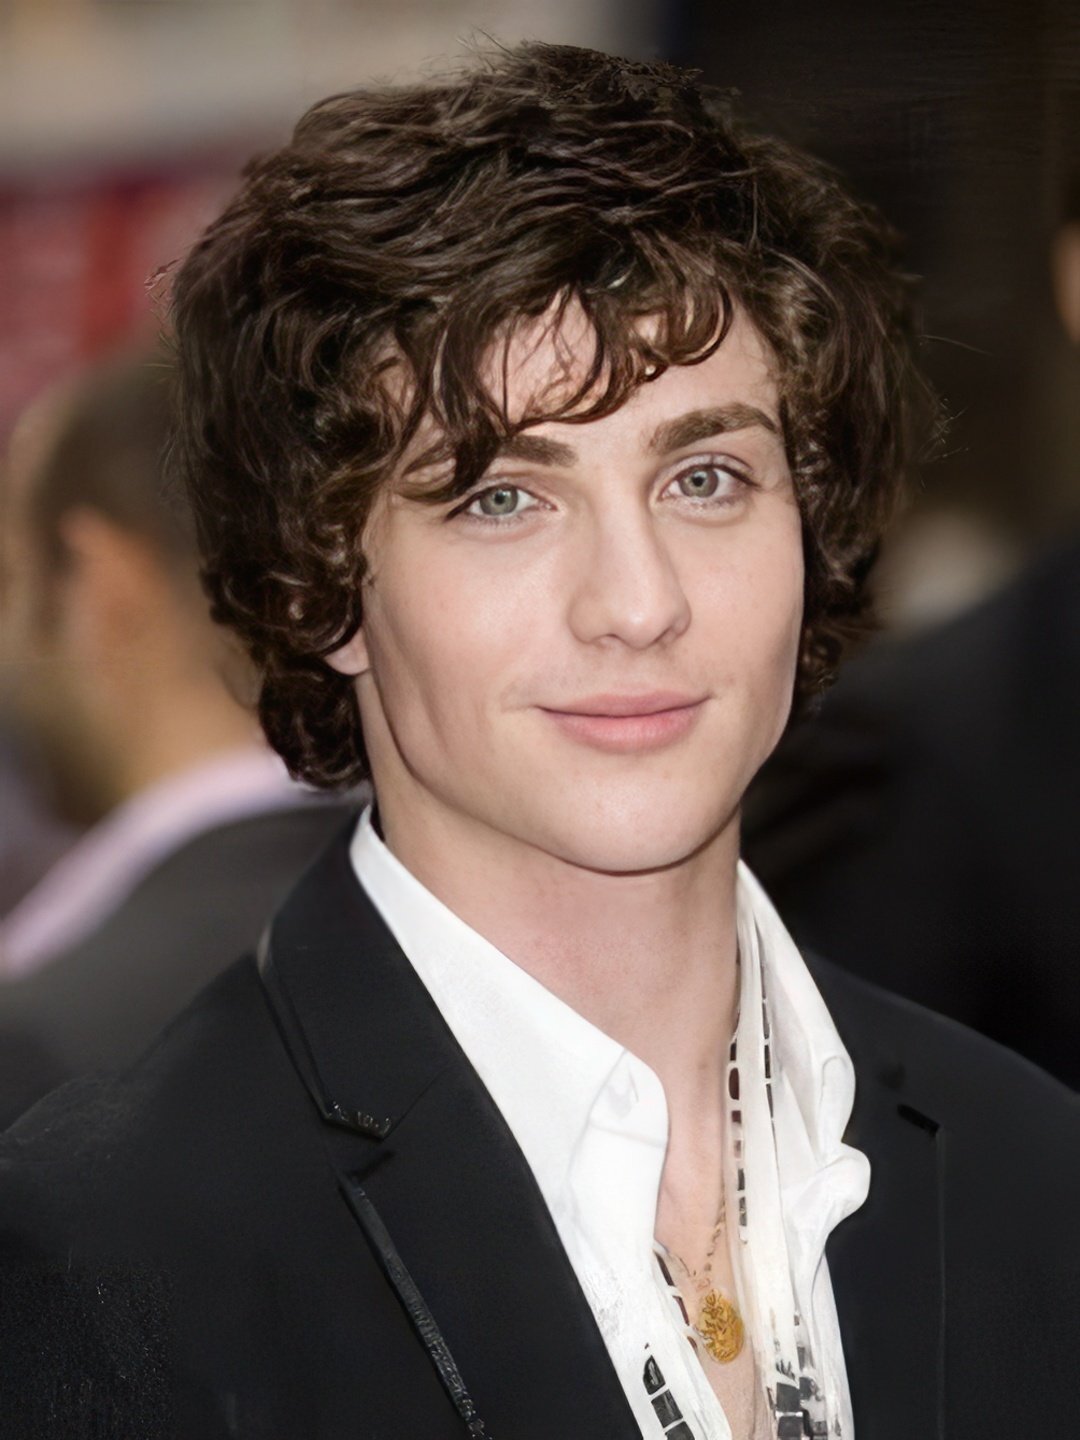 Aaron Taylor-Johnson in real life